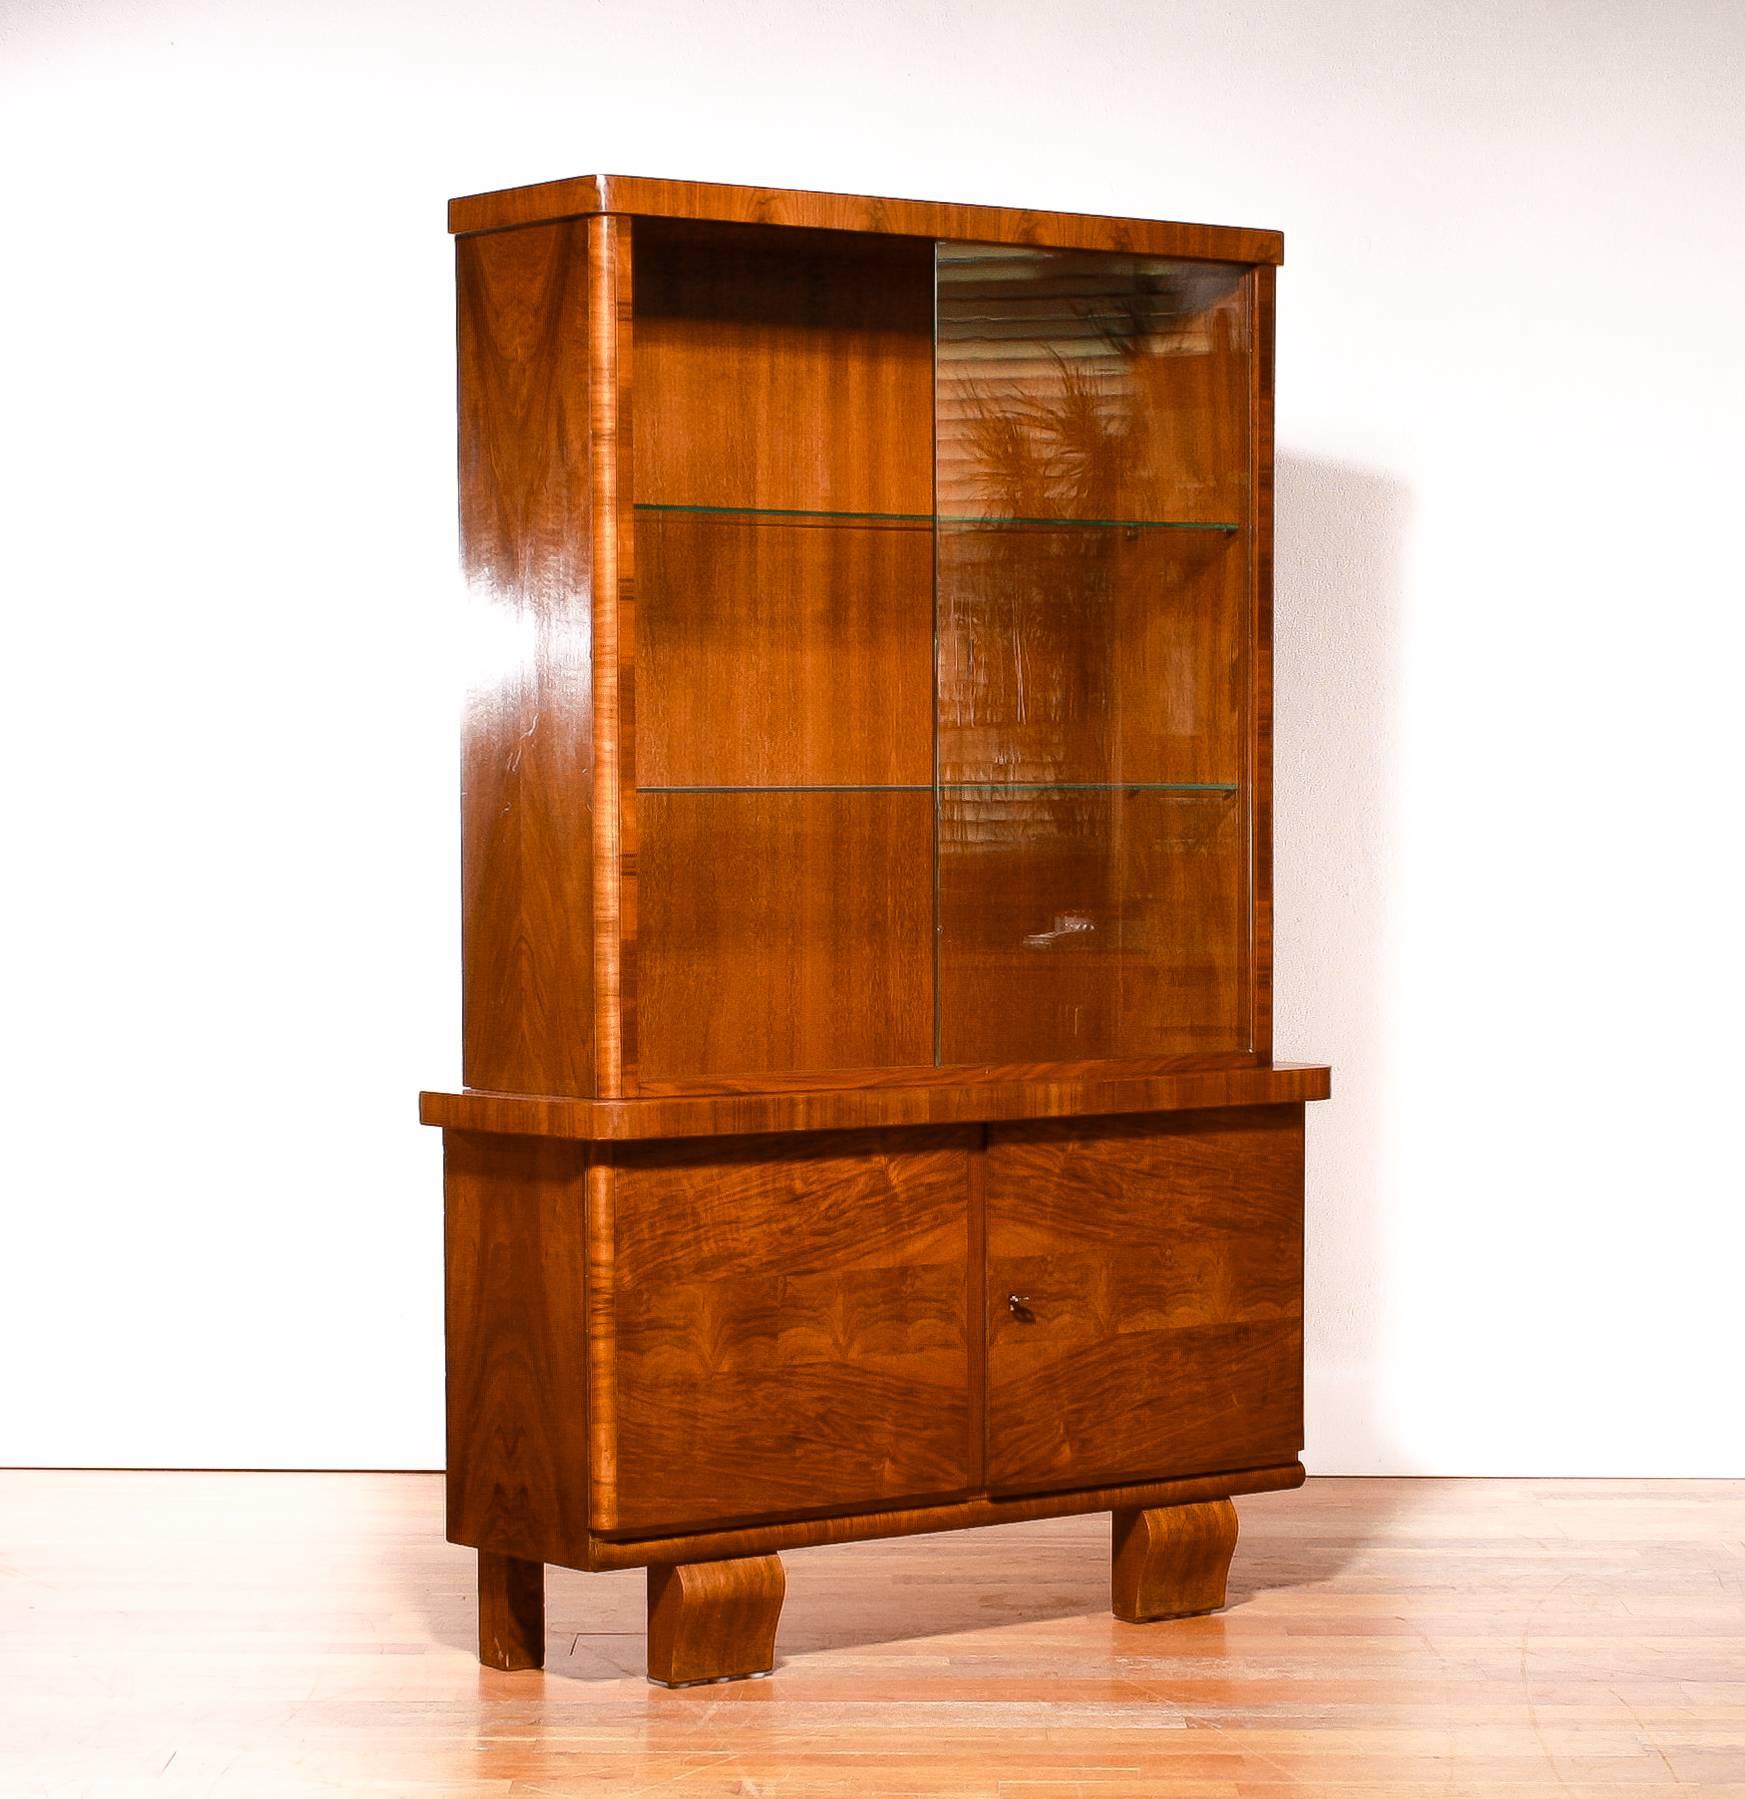 Beautiful Art Deco display cabinet.

The cabinet is made of beautiful walnut veneer and is in a perfect condition.

The original sliding glass doors are still entirely intact. (Just one little invisible chip on the inside of the